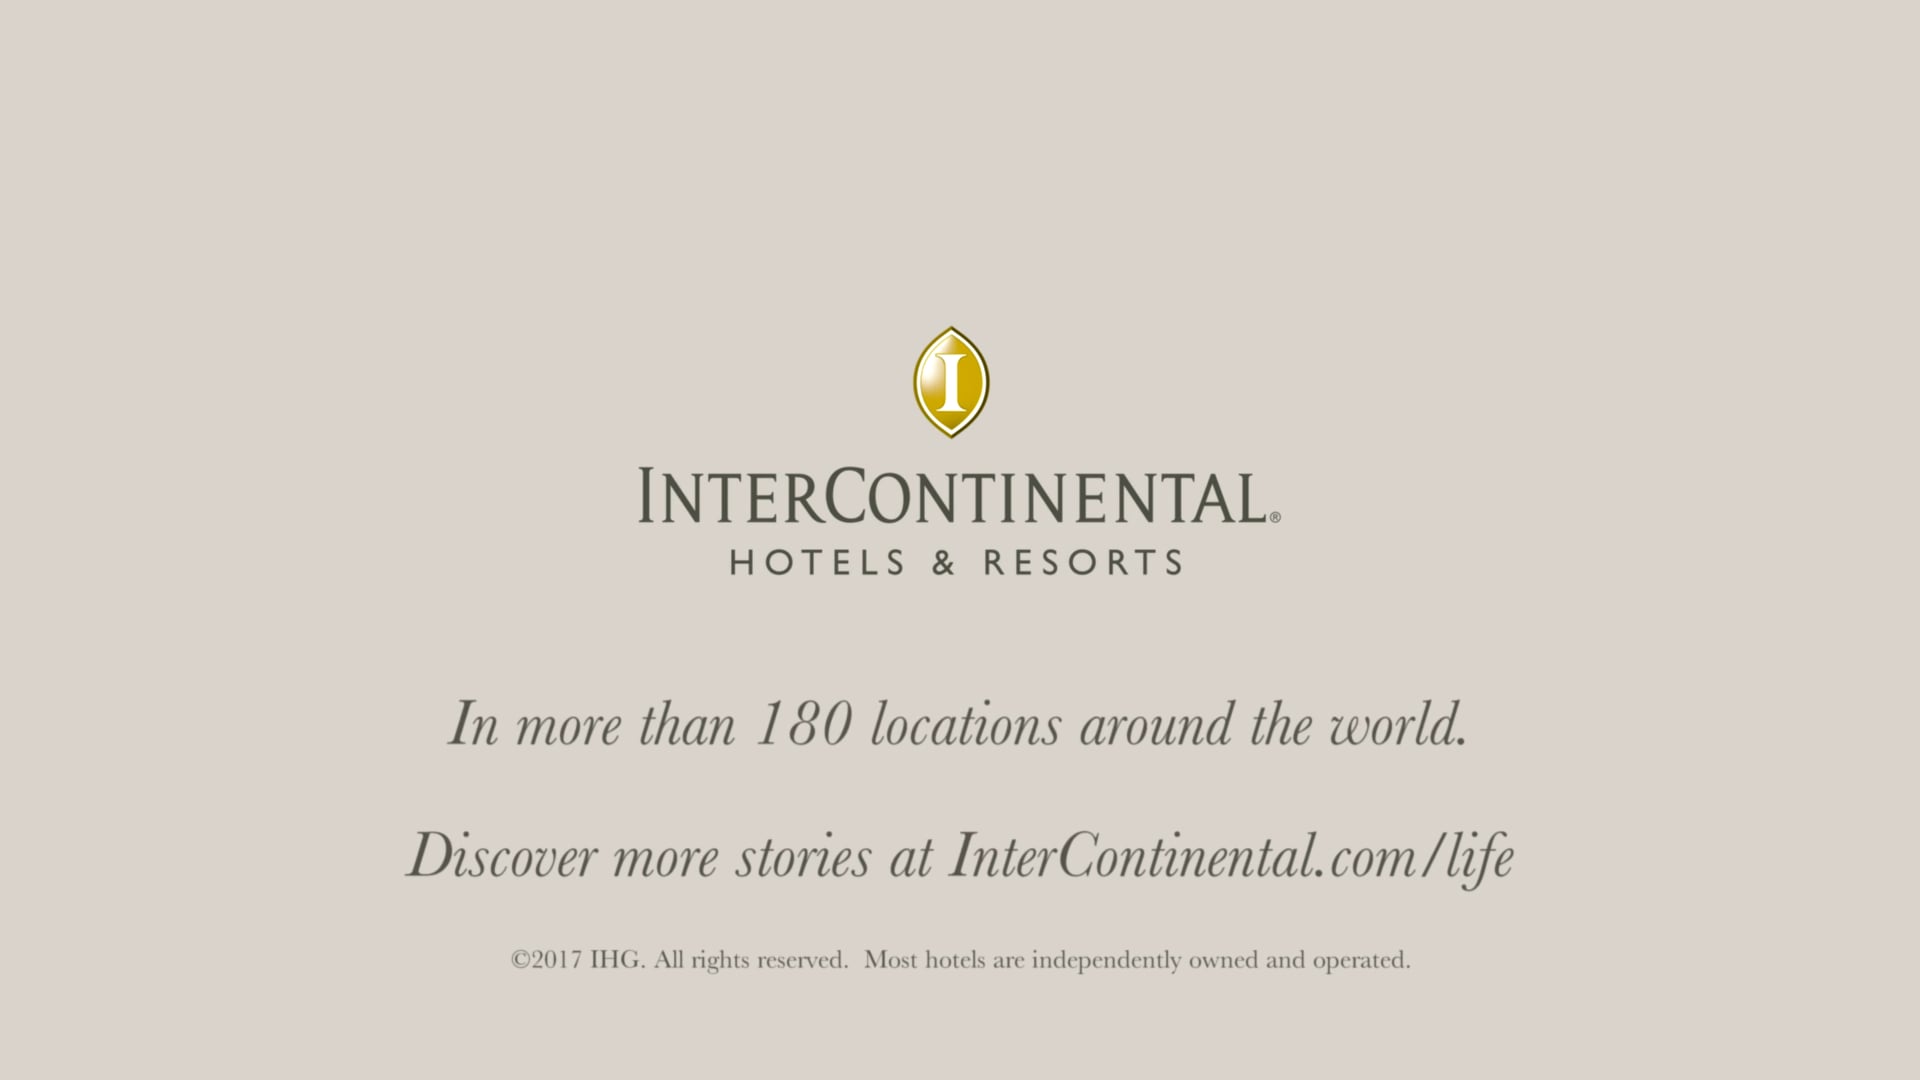 Intercontinental Hotel Group "Experience" (:30)